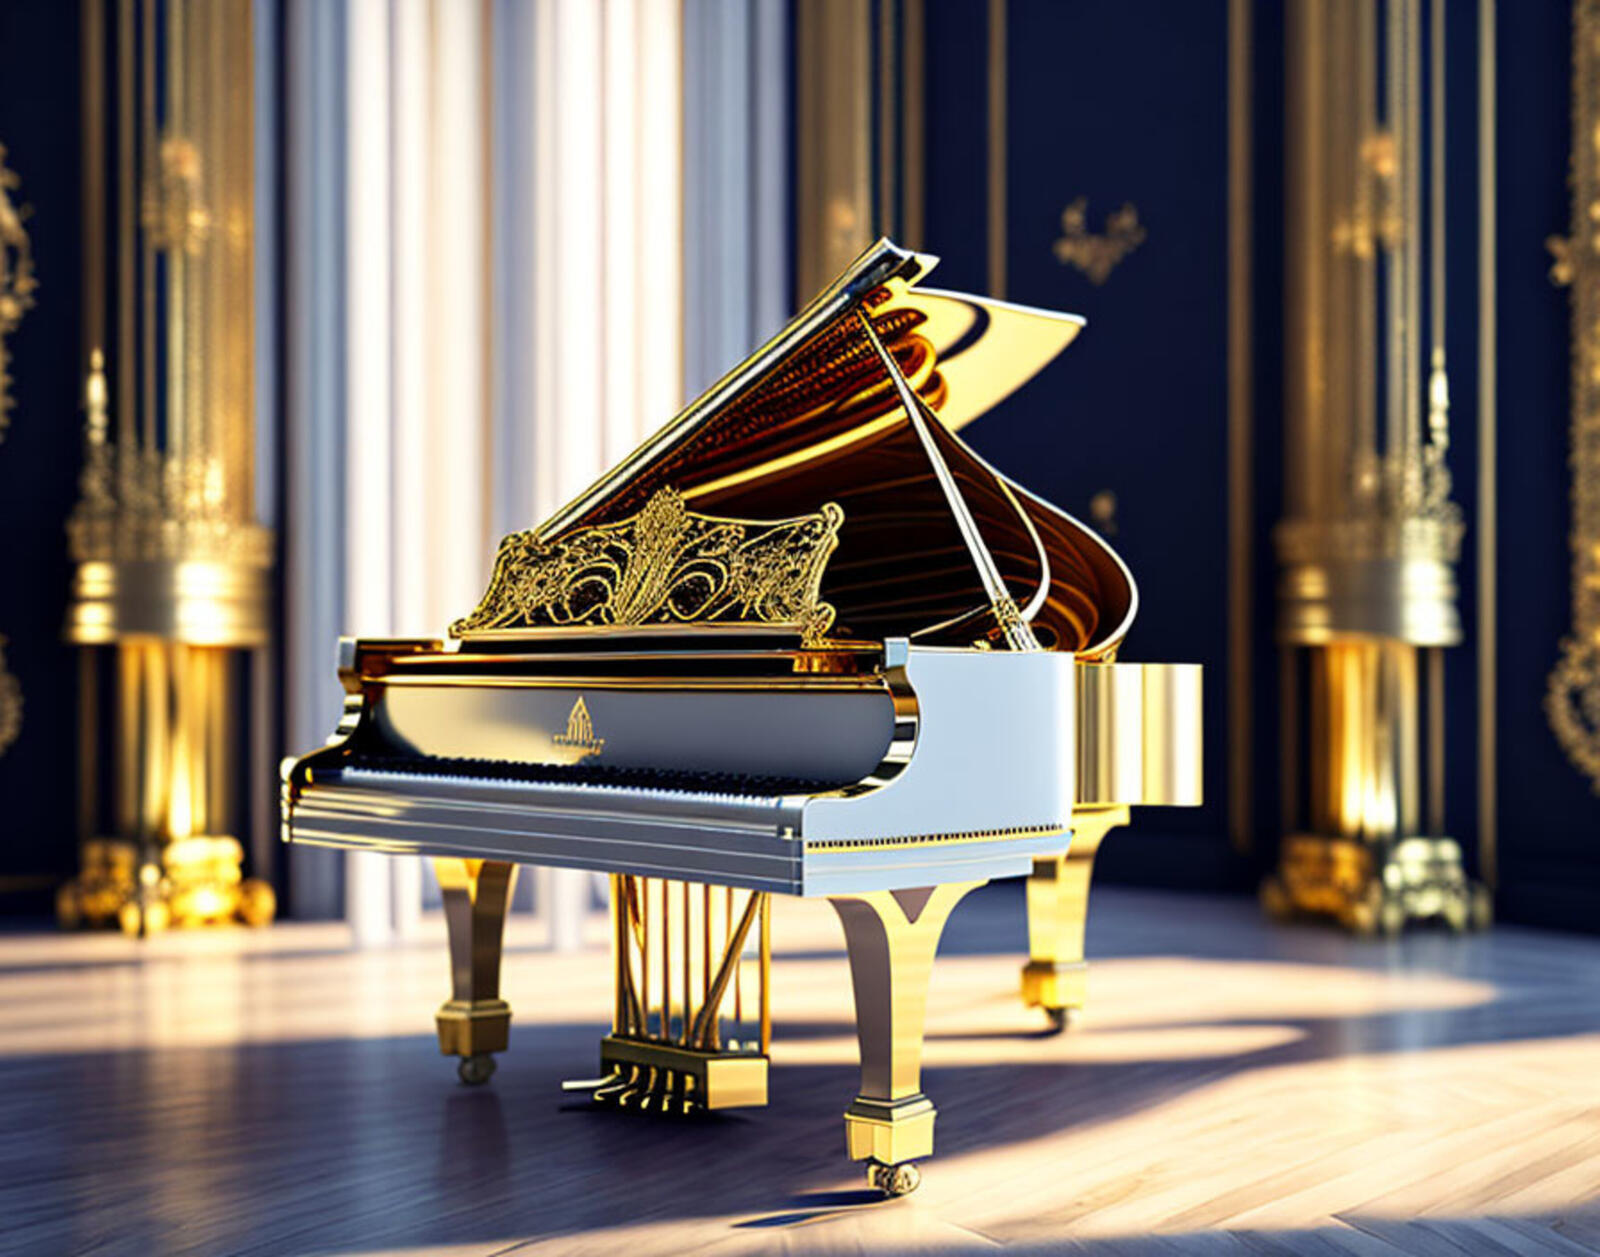 Free photo An antique piano in a room with gilded columns